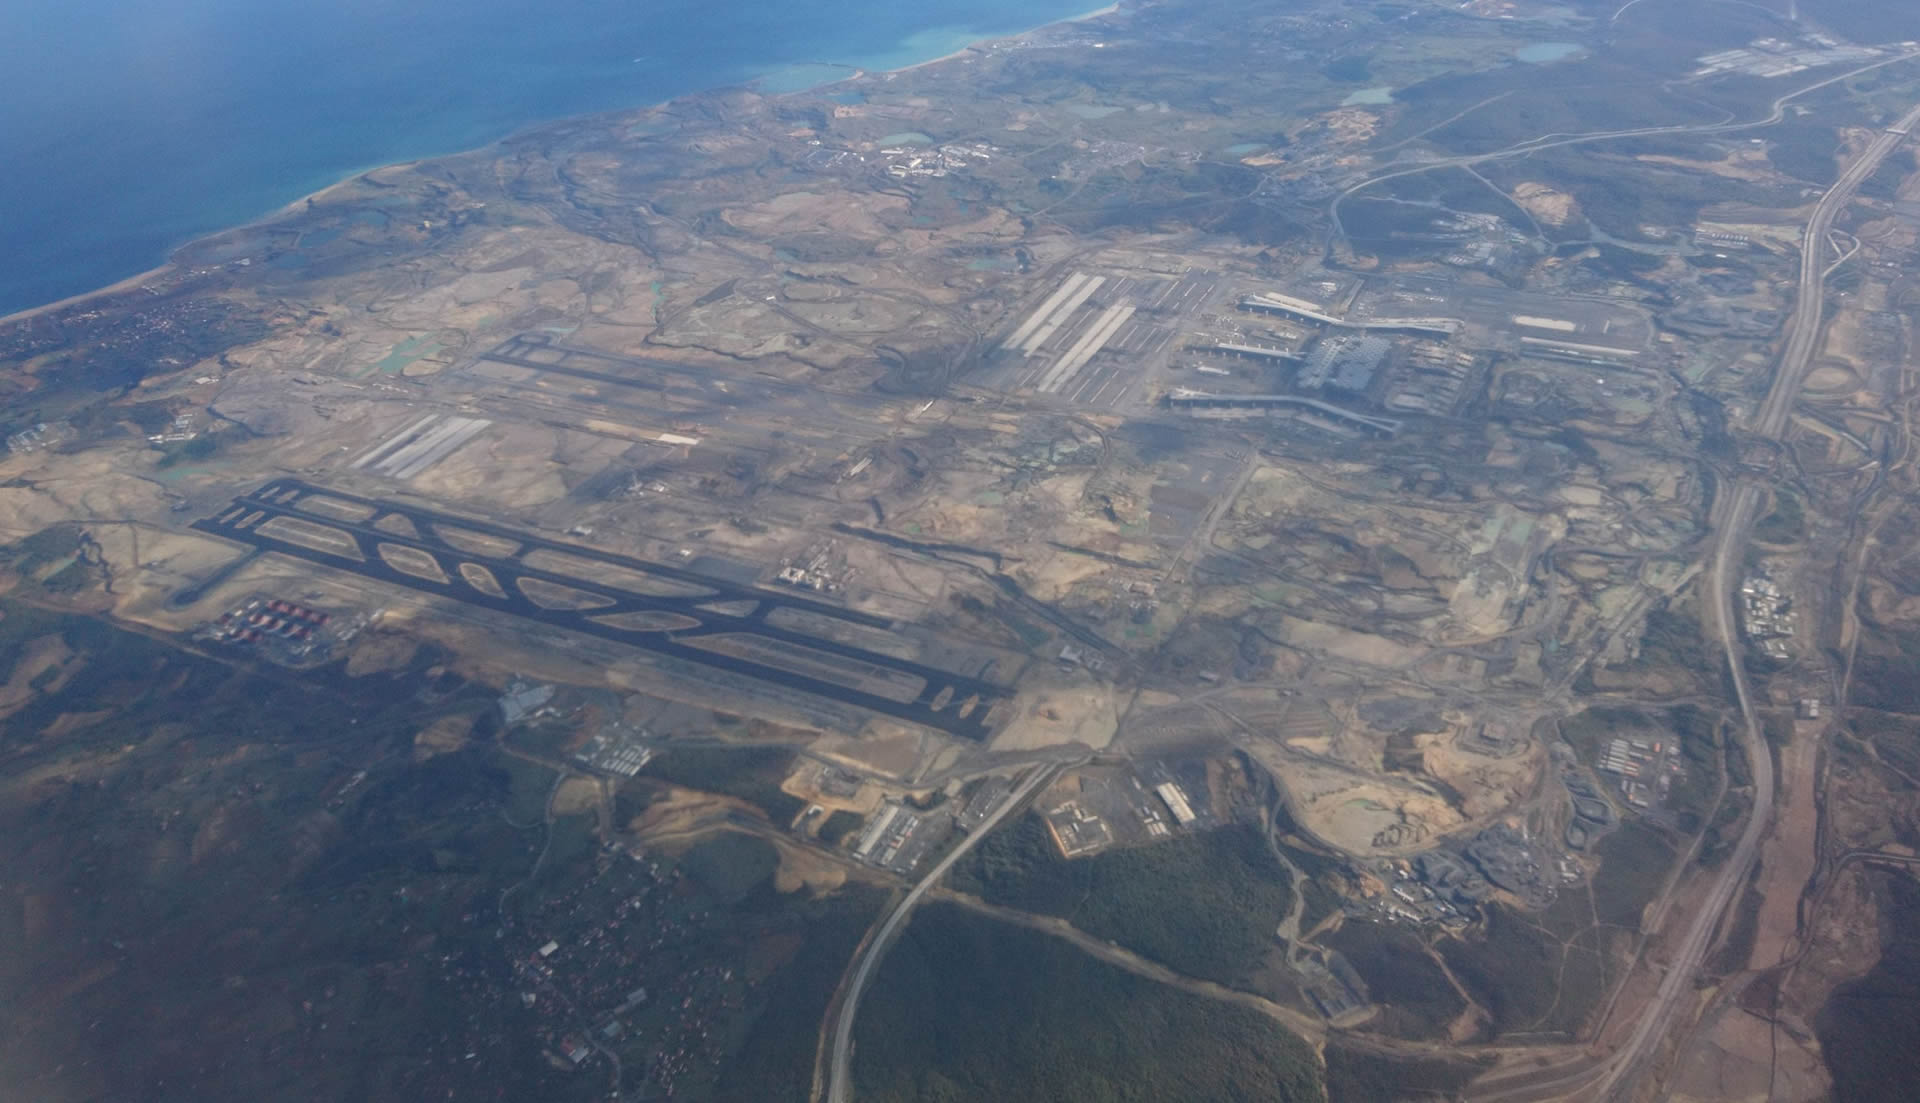 istanbul airport construction 2017 aerial view